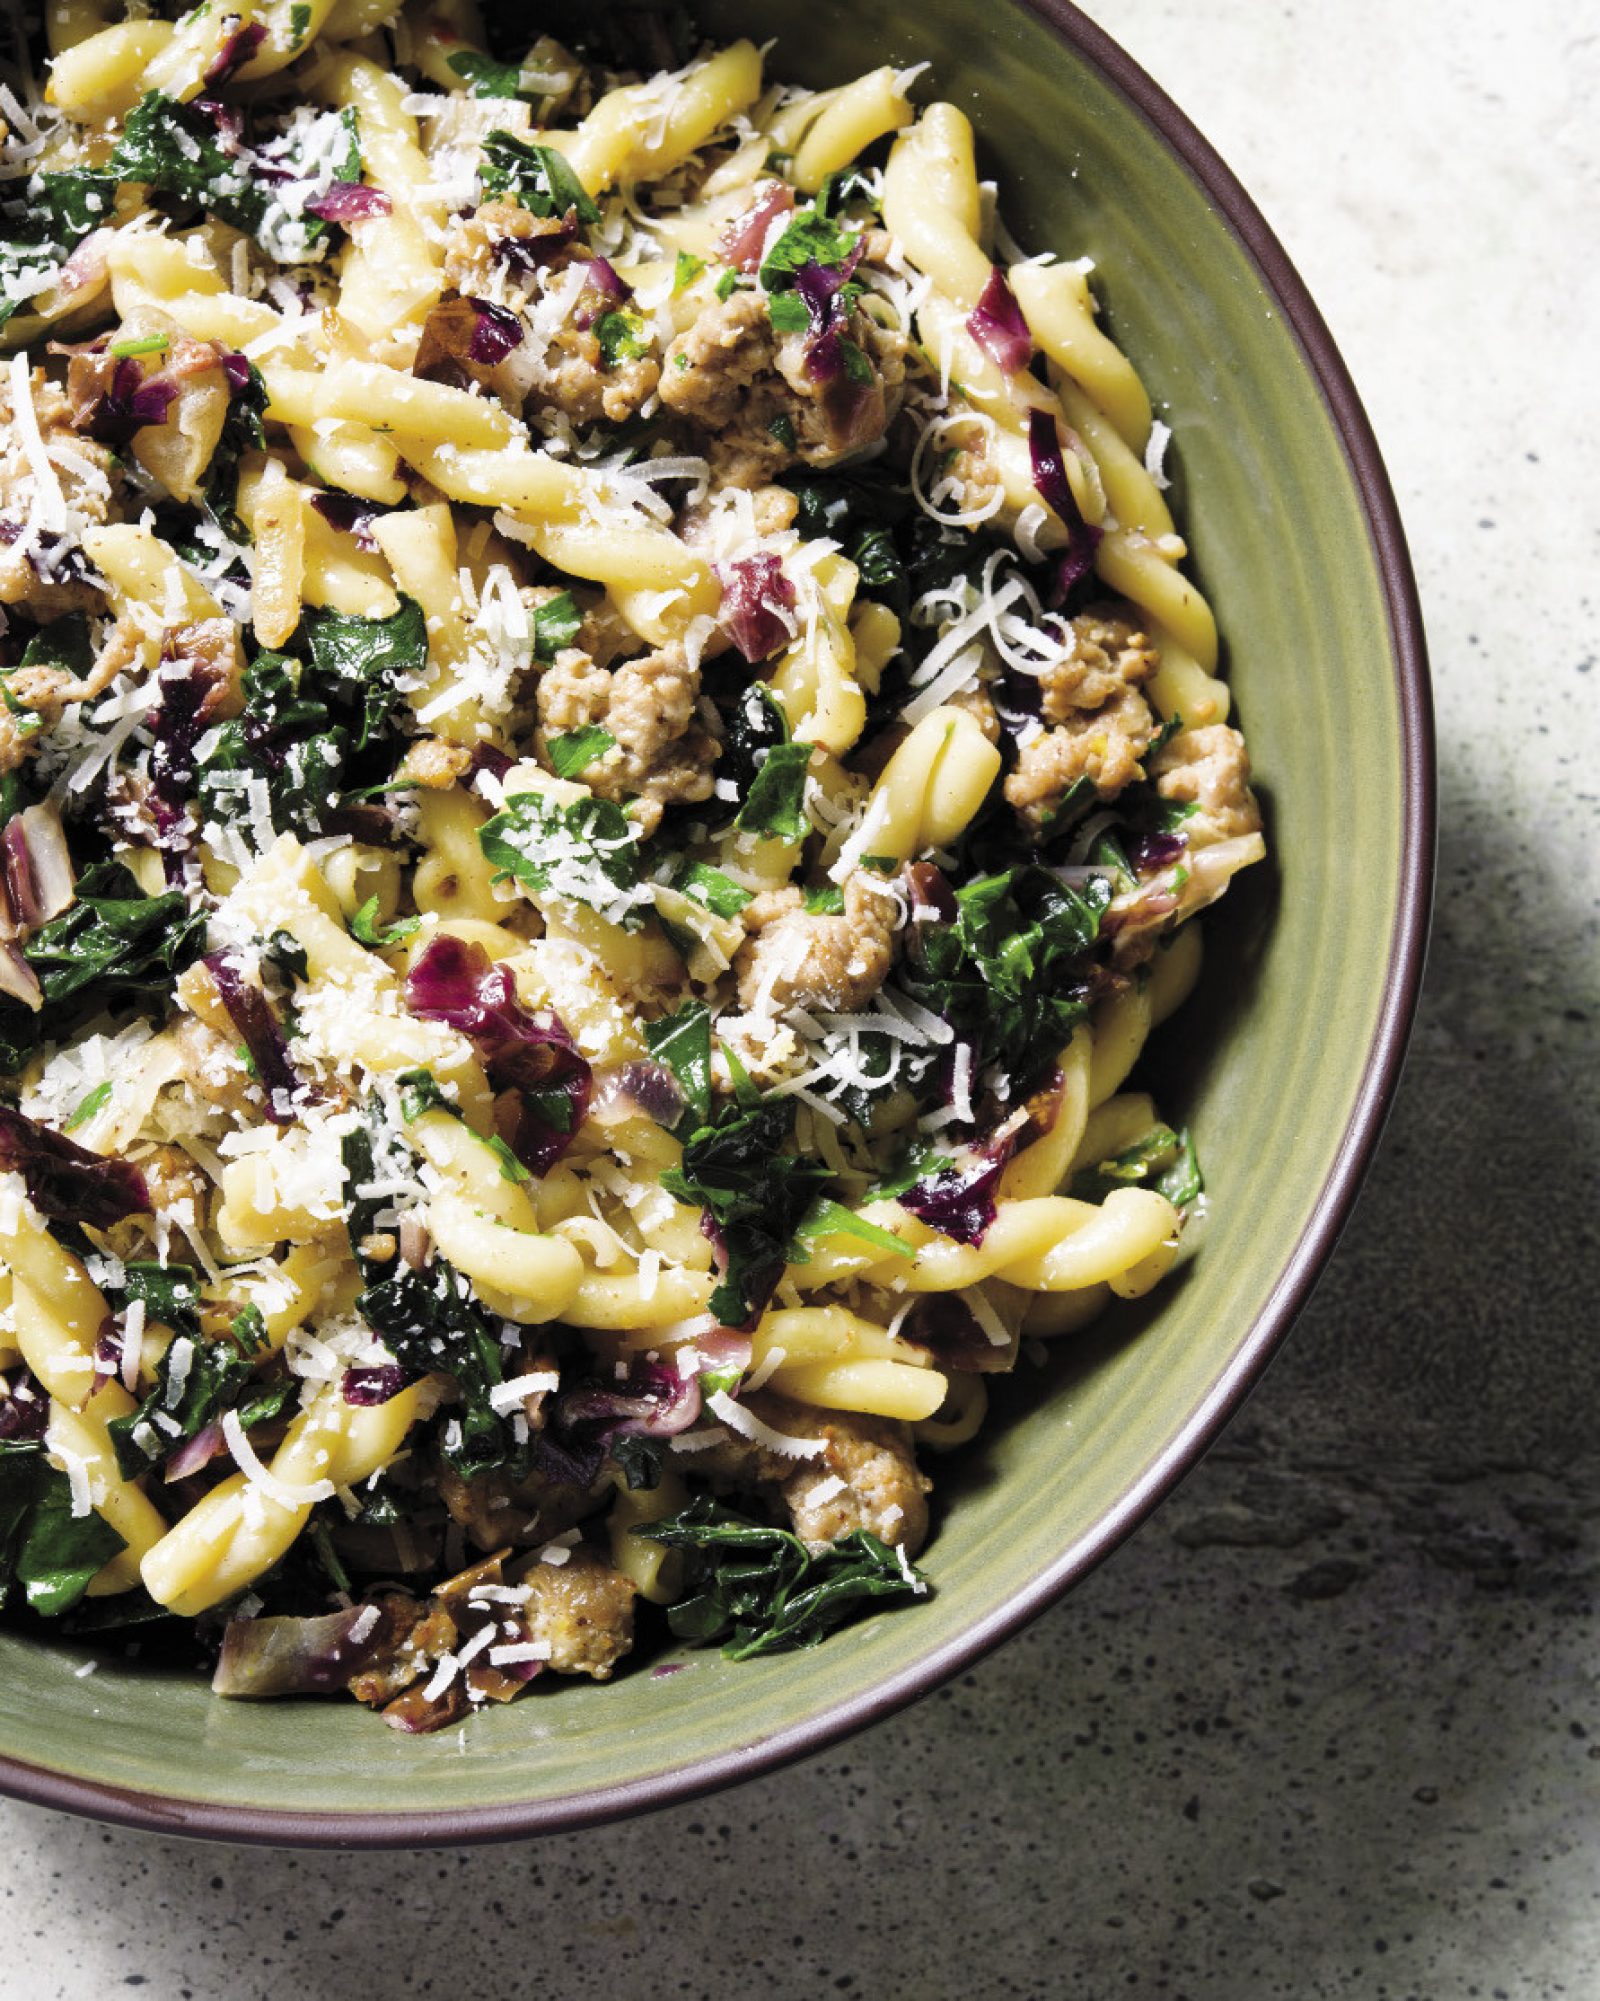 Creamy Pasta with Sausage and Hardy Greens